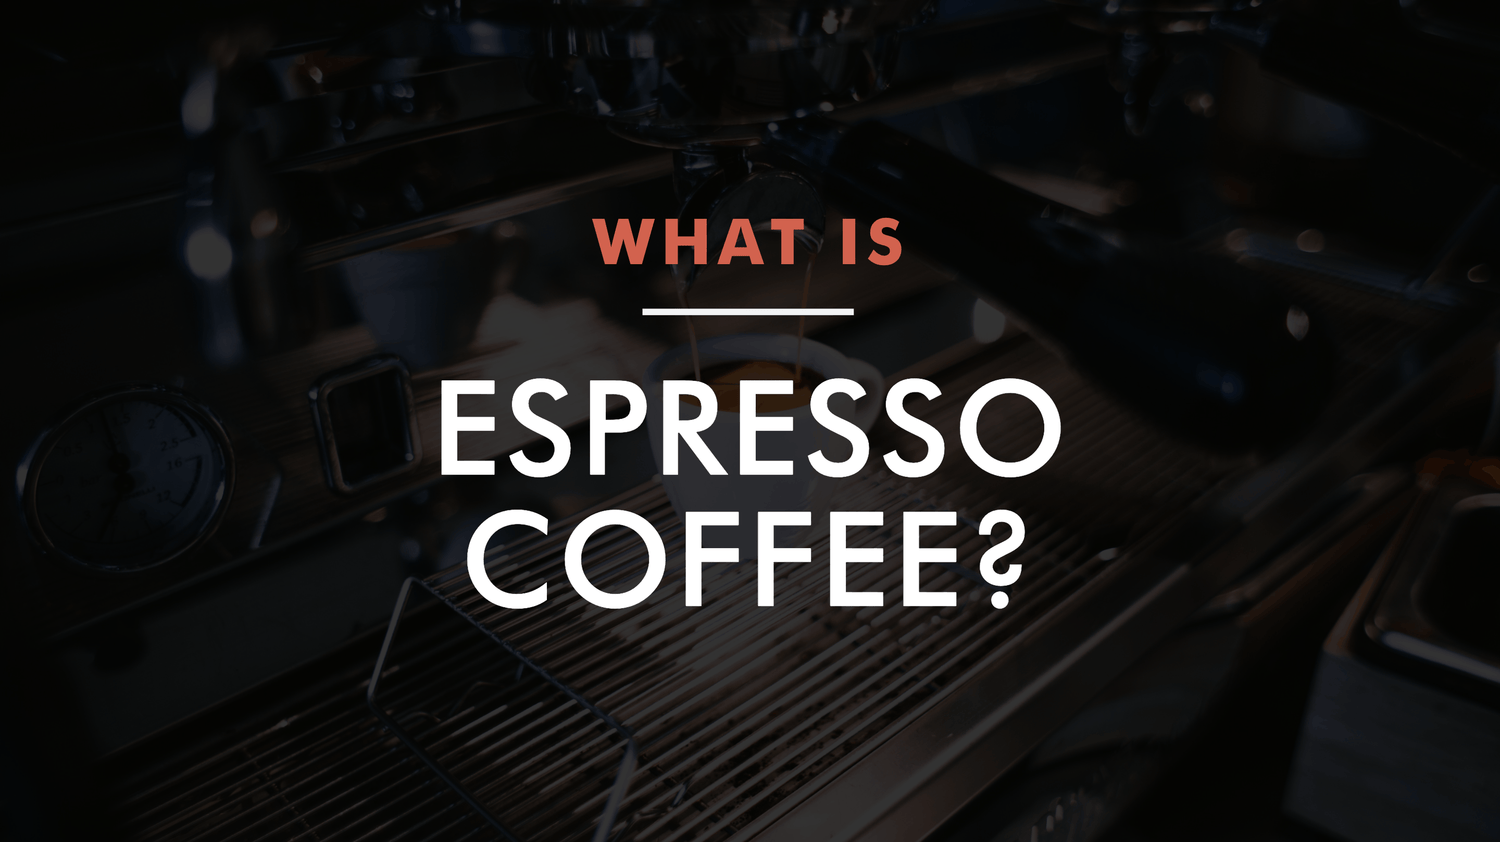 What is Espresso Coffee?